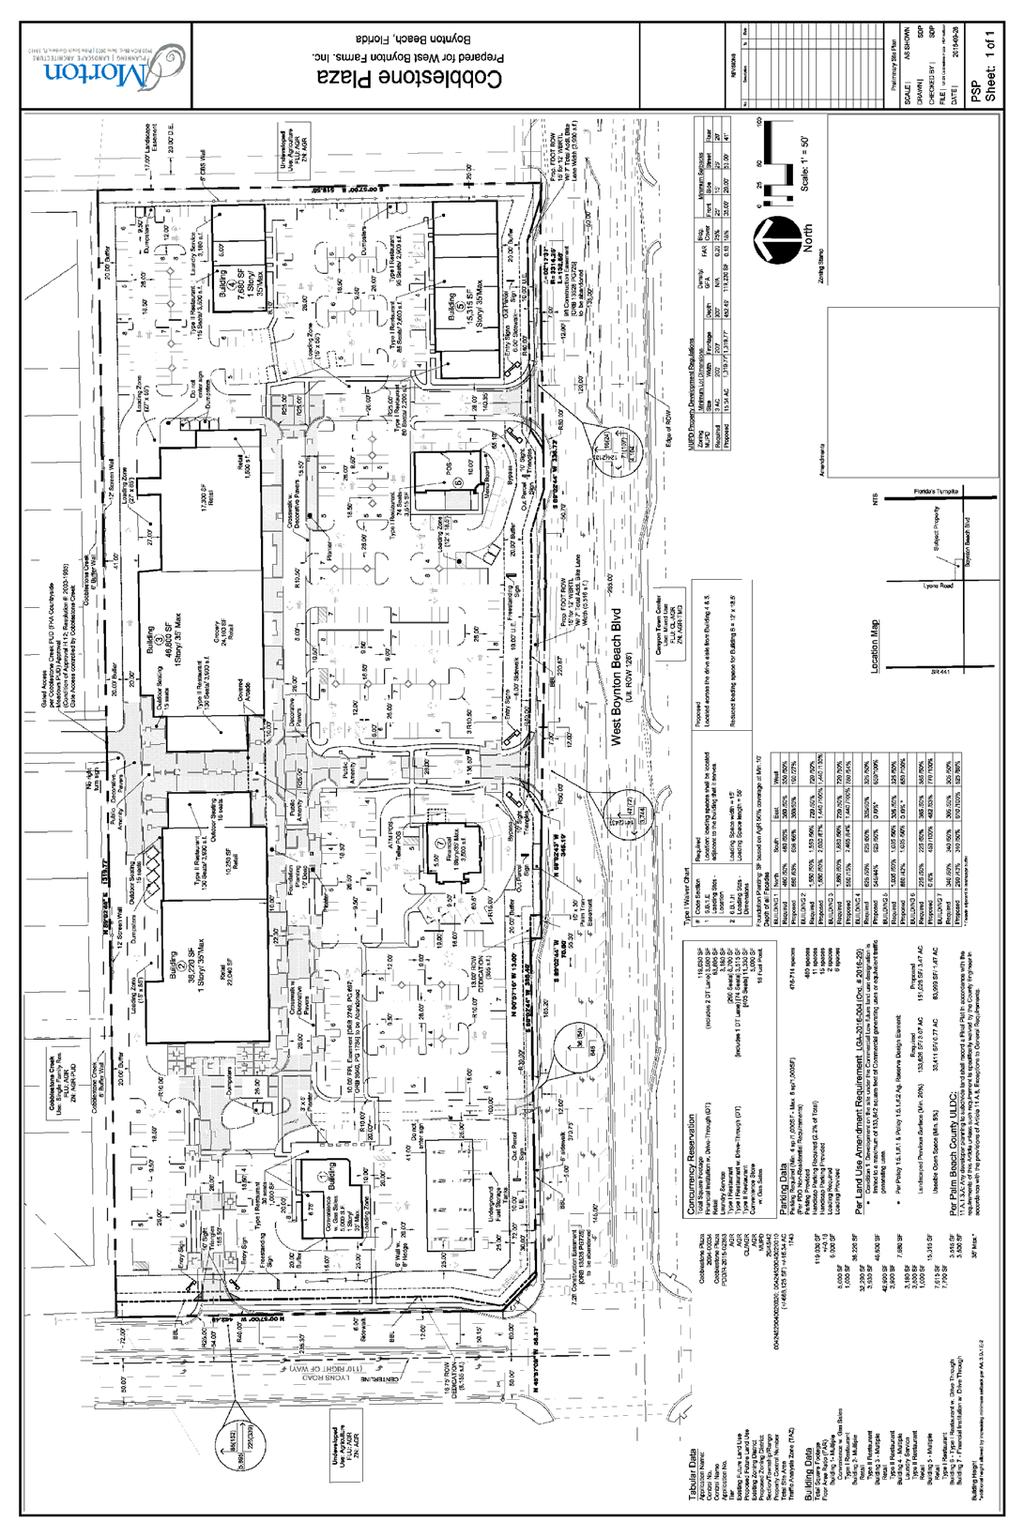 Figure 4 - Preliminary Site Plan dated